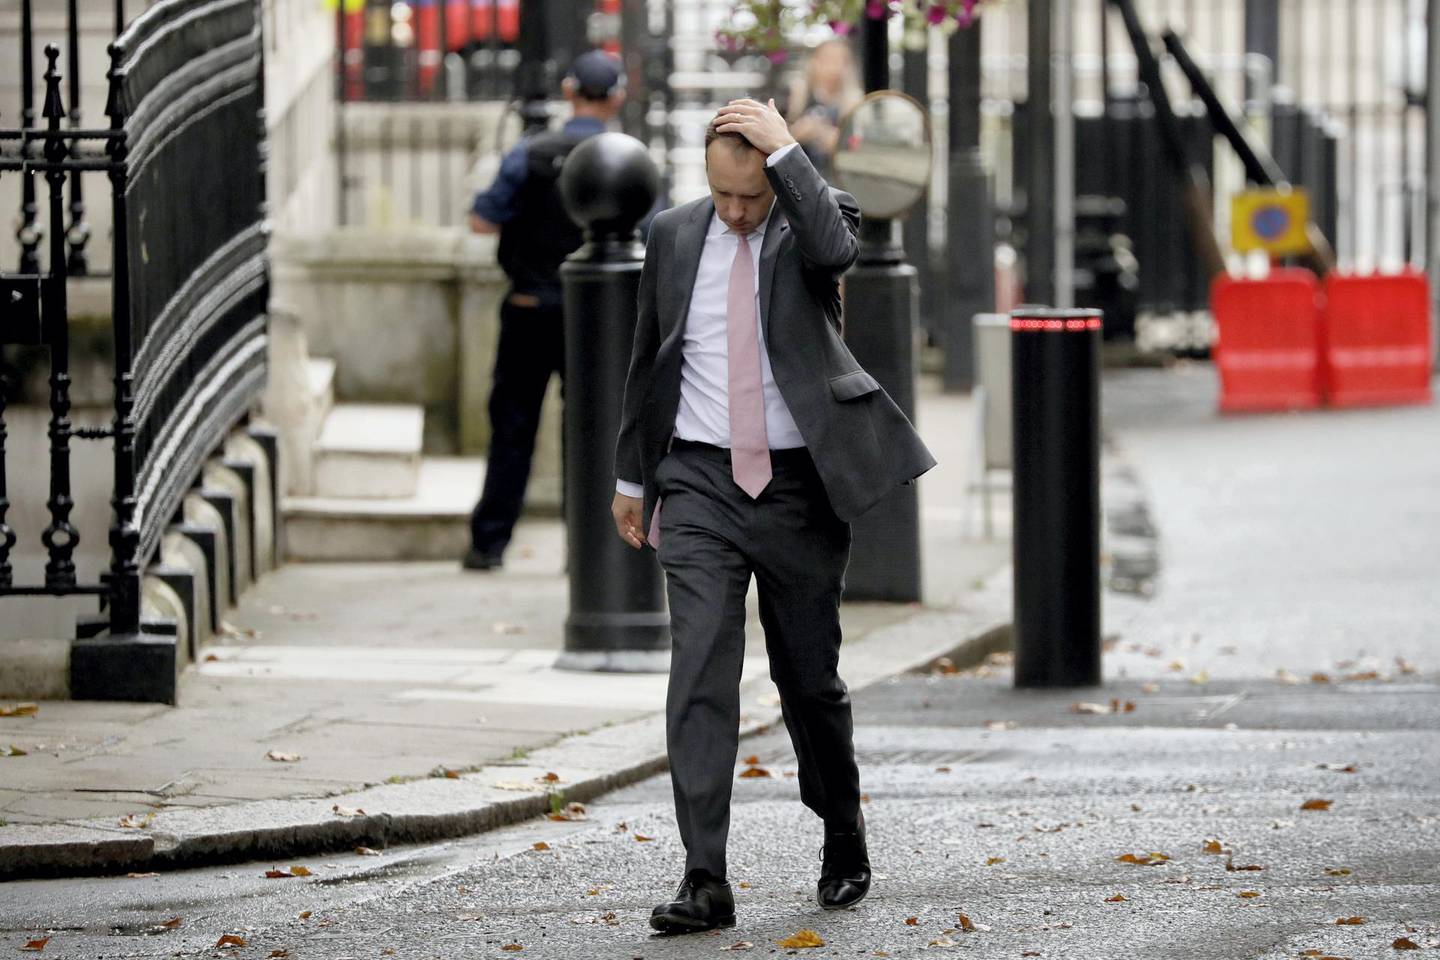 FILE - In this Wednesday, Sept. 23, 2020 file photo British Health Secretary Matt Hancock walks through Downing Street on his way into number 10, in London. More than 100,000 people have died in the United Kingdom after contracting the coronavirus. That's according to government figures released Tuesday Jan. 26, 2021. Britain is the fifth country in the world to pass that mark, after the United States, Brazil, India and Mexico, and by far the smallest. The U.S. has recorded more than 400,000 COVID-19 deaths, the world's highest total, but its population of about 330 million is about five times Britain's. (AP Photo/Matt Dunham, File)